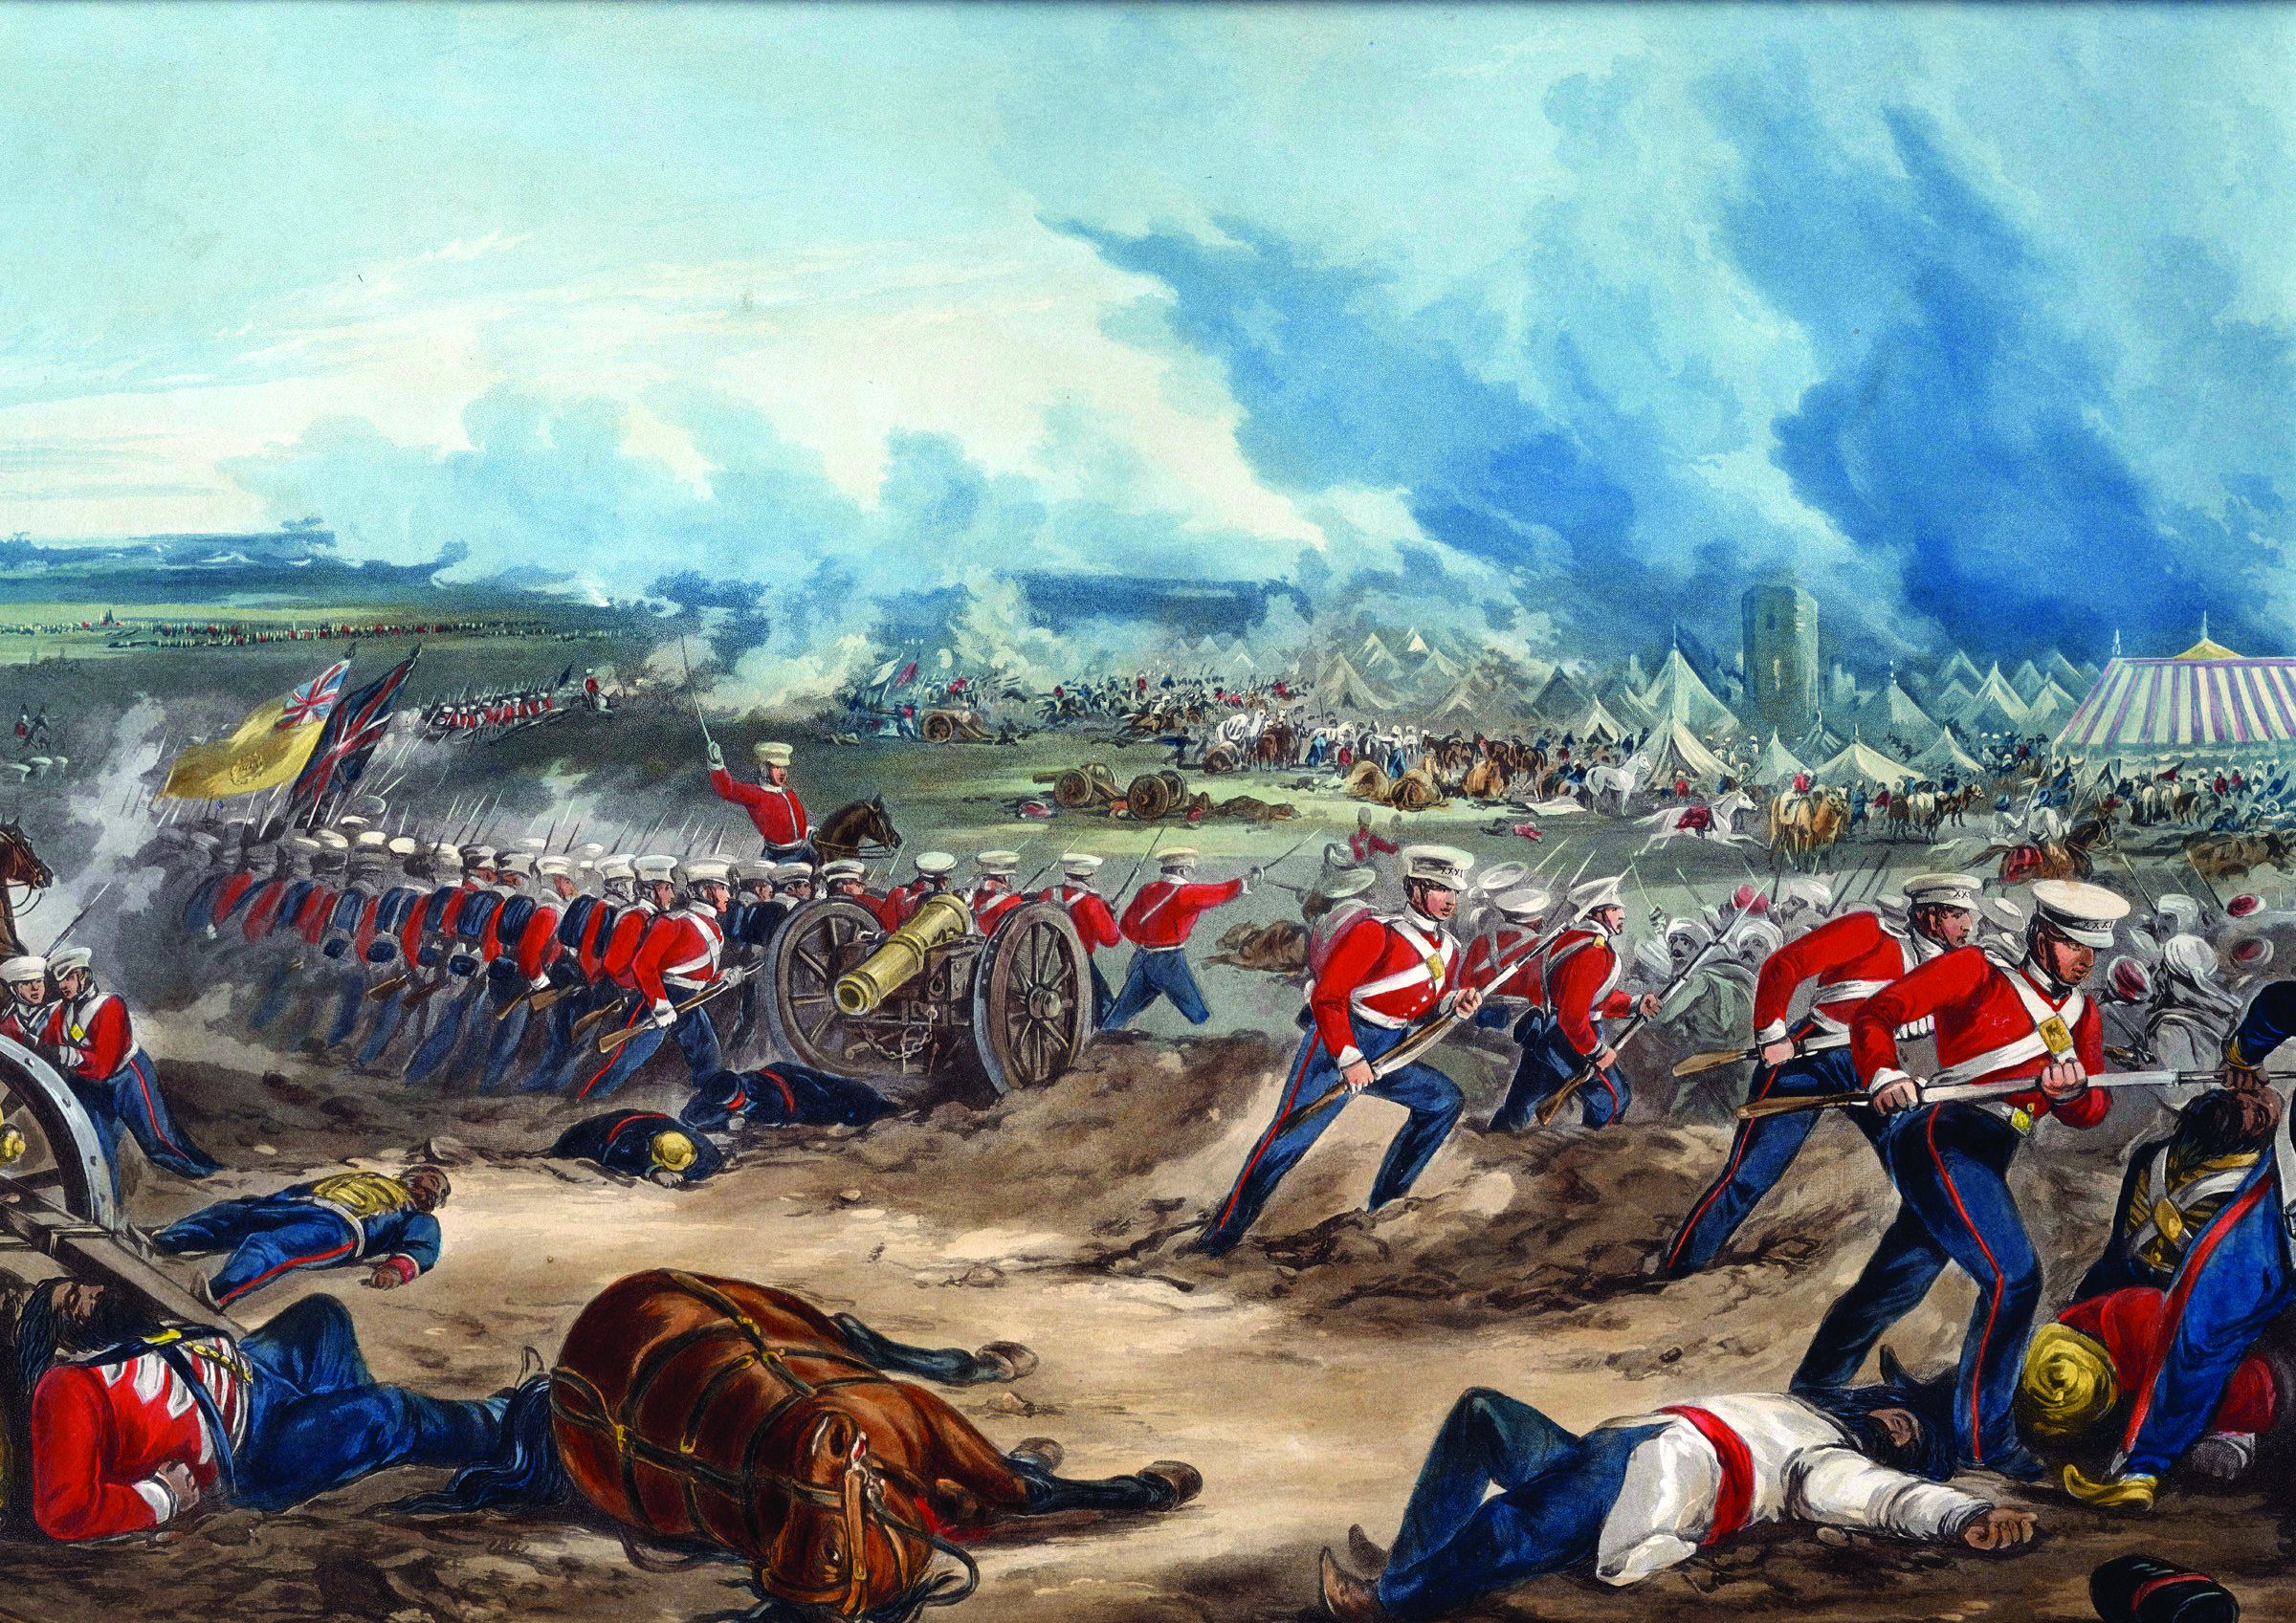 The 31st Regiment of Major General Sir Harry Smith’s division leads the British charge against the Sikhs at “Midnight Mudki” on December 18, 1845. The fighting continued well into the night.